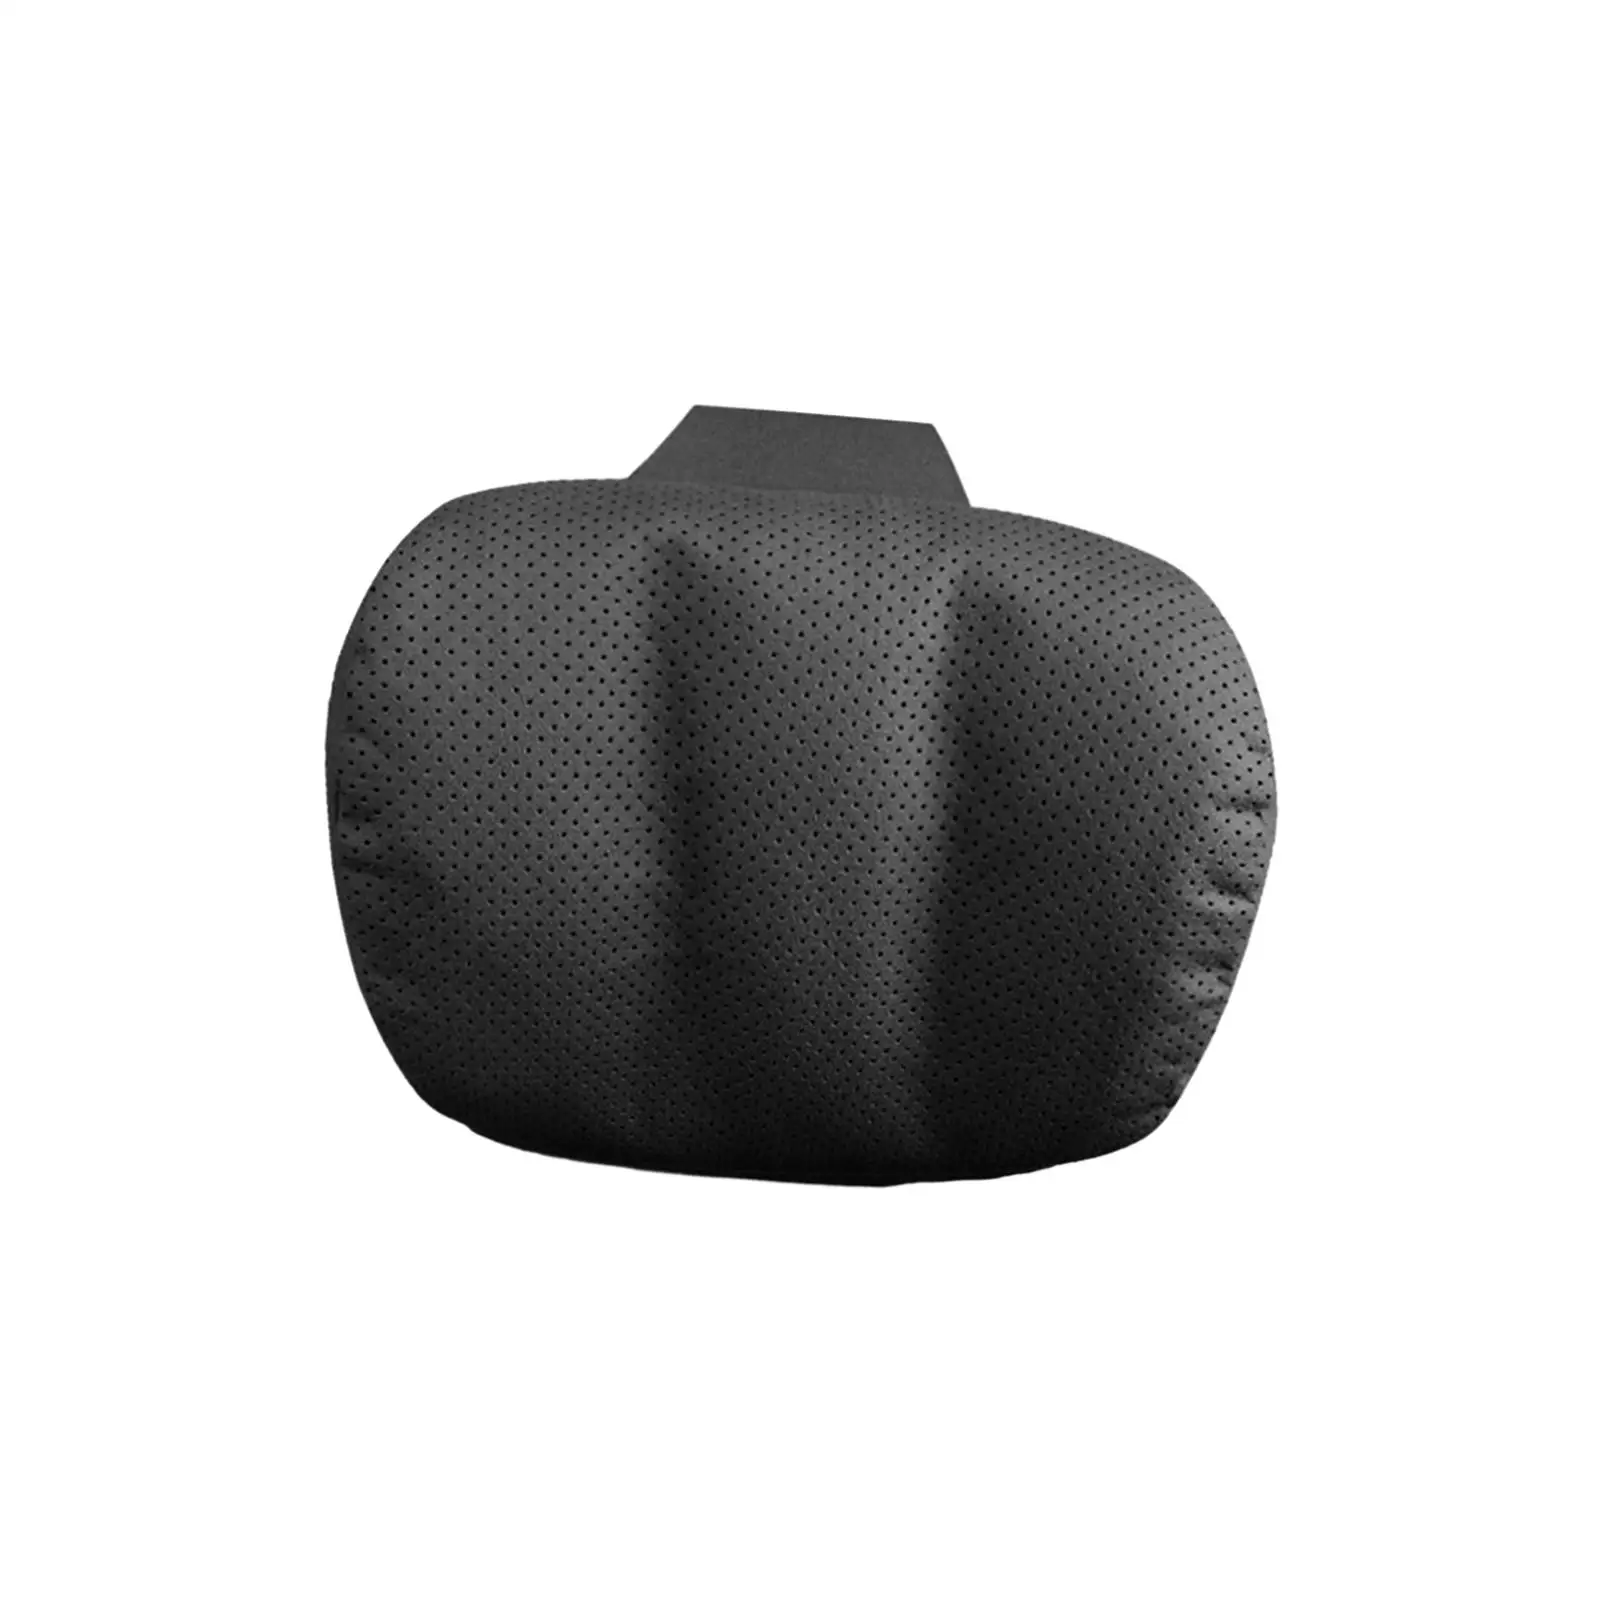 Head Rest Pillows Breathable Interior Accessories Premium Soft Automotive Neck Support for Home Office Travel Driving Seat